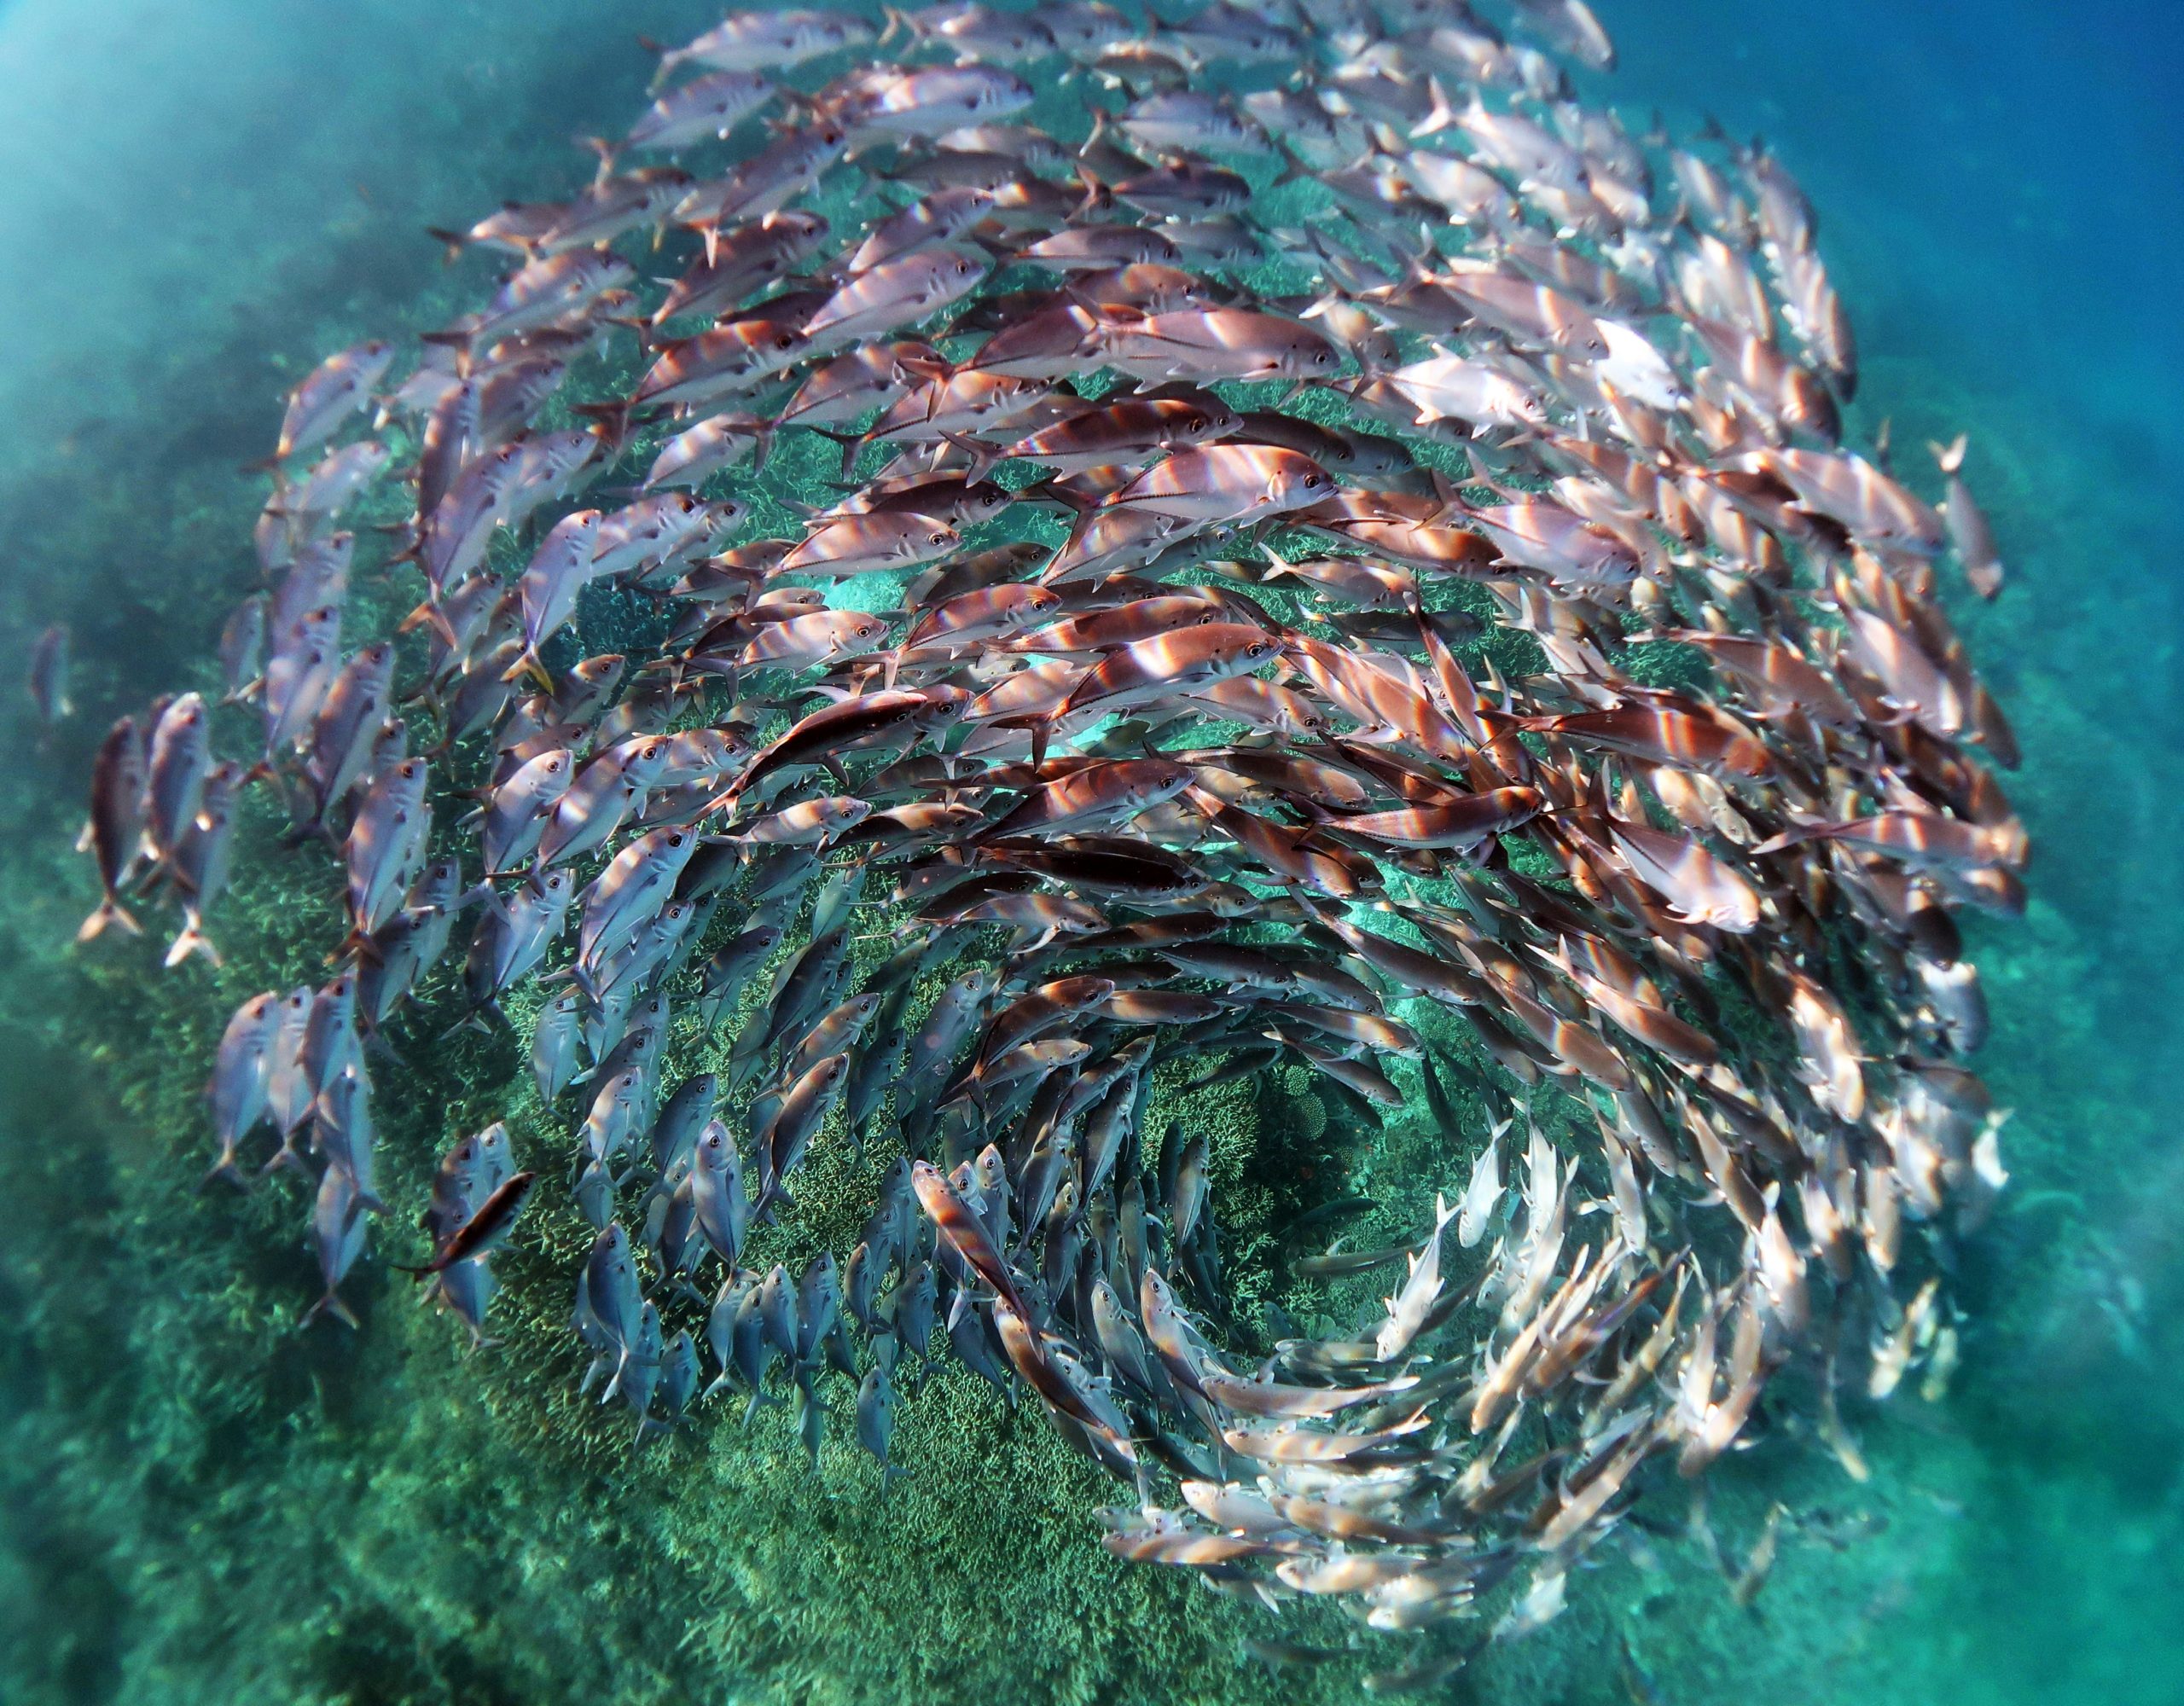 A school of jack fish in a spiral formation at Heron Island in the Great Barrier Reef.  (Photo: Kristen Brown (CC BY 4.0))